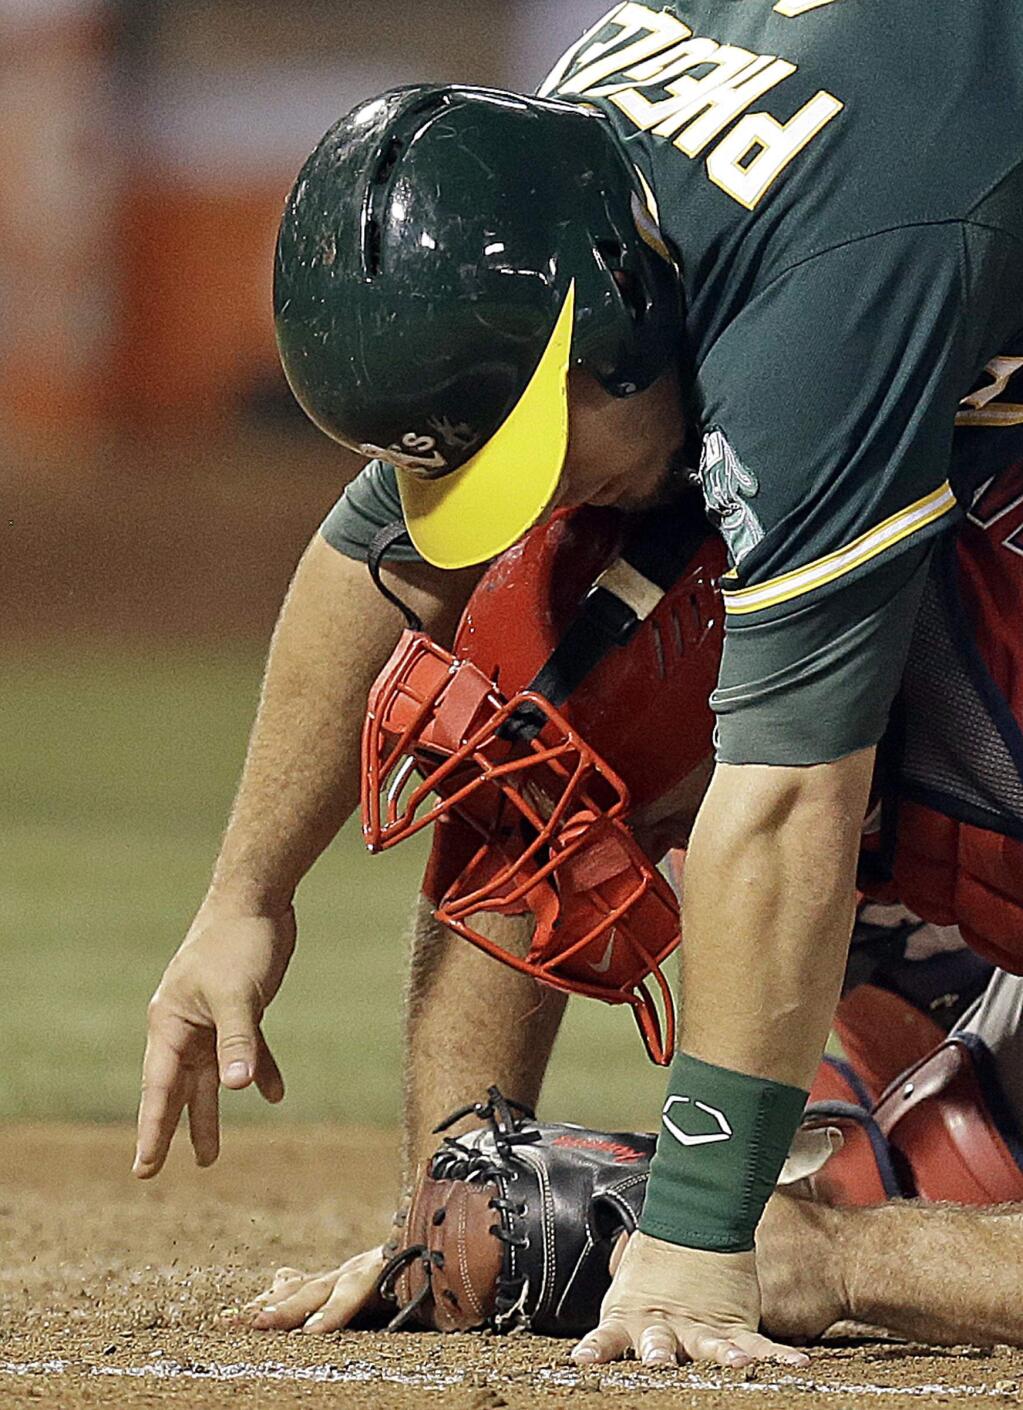 Oakland Athletics' Josh Phegley, top, scores as he falls on Los Angeles Angels catcher Chris Iannetta in the third inning of a baseball game Monday, Aug. 31, 2015, in Oakland, Calif. Phegley scored on a double by Jake Smolinski. (AP Photo/Ben Margot)